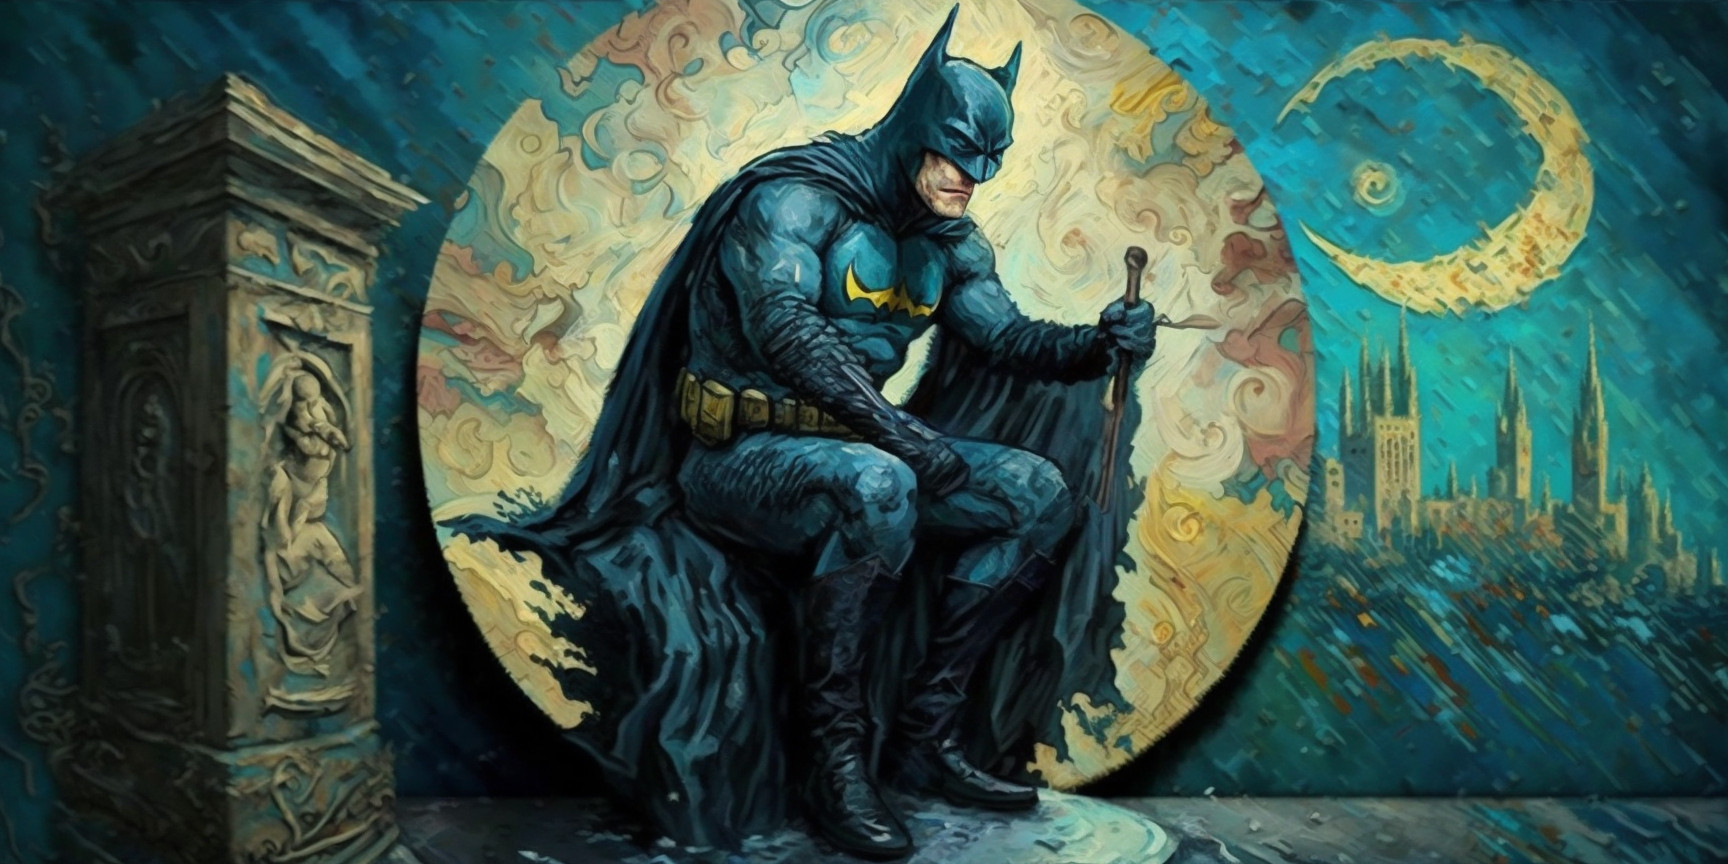 Batman on the can in the style of Van Gogh’s The Starry Night